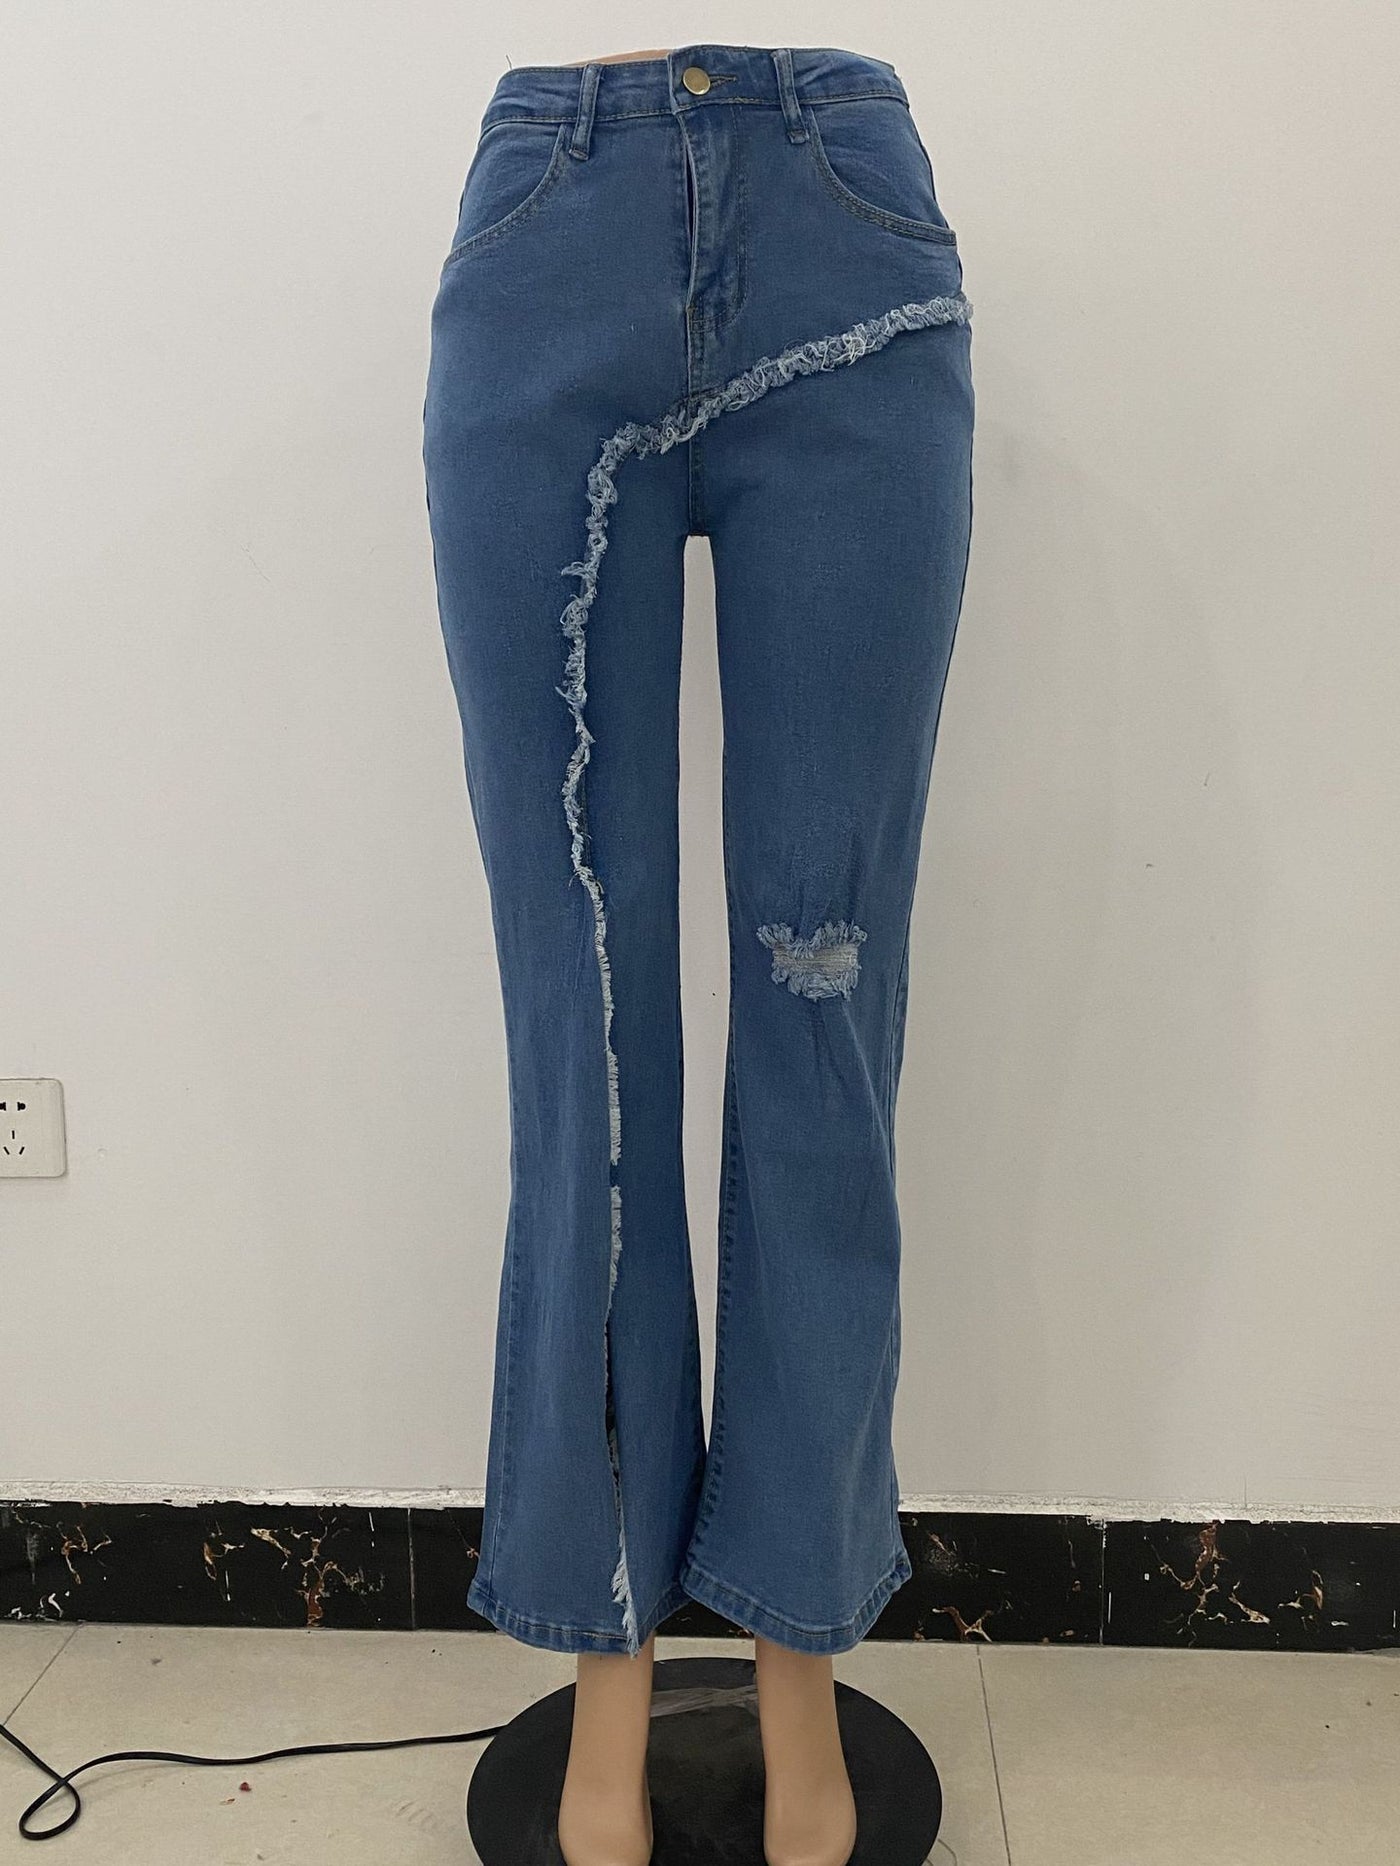 New style elastic ripped flared pants jeans women - Carvan Mart